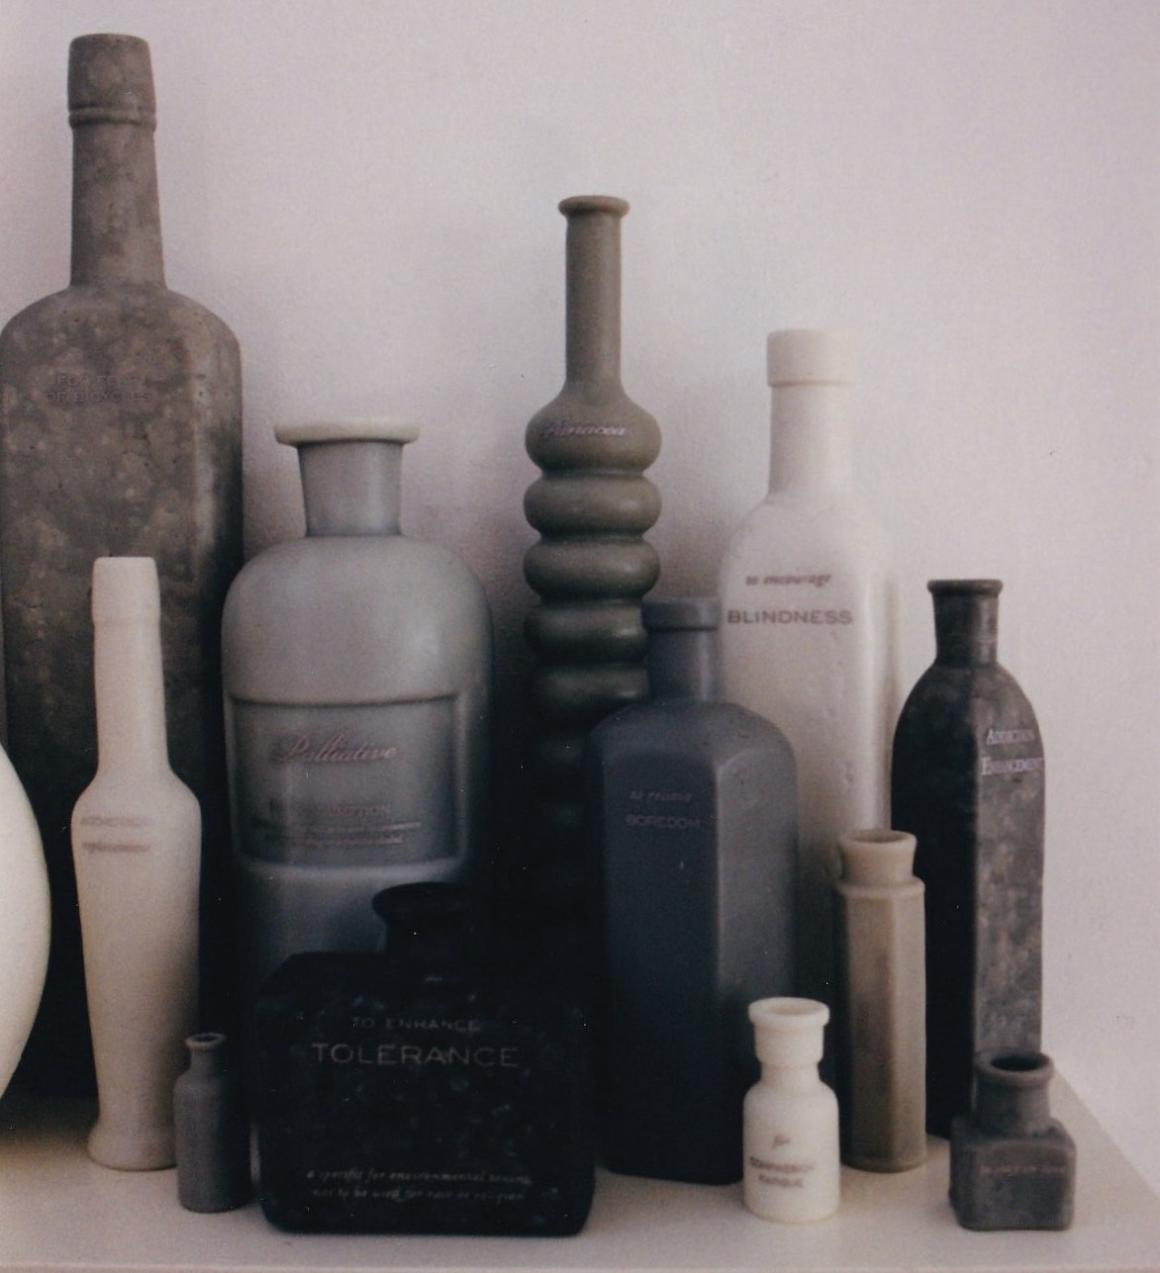 Natural Magic: Cures for Modern Maladies (Detail), 2000